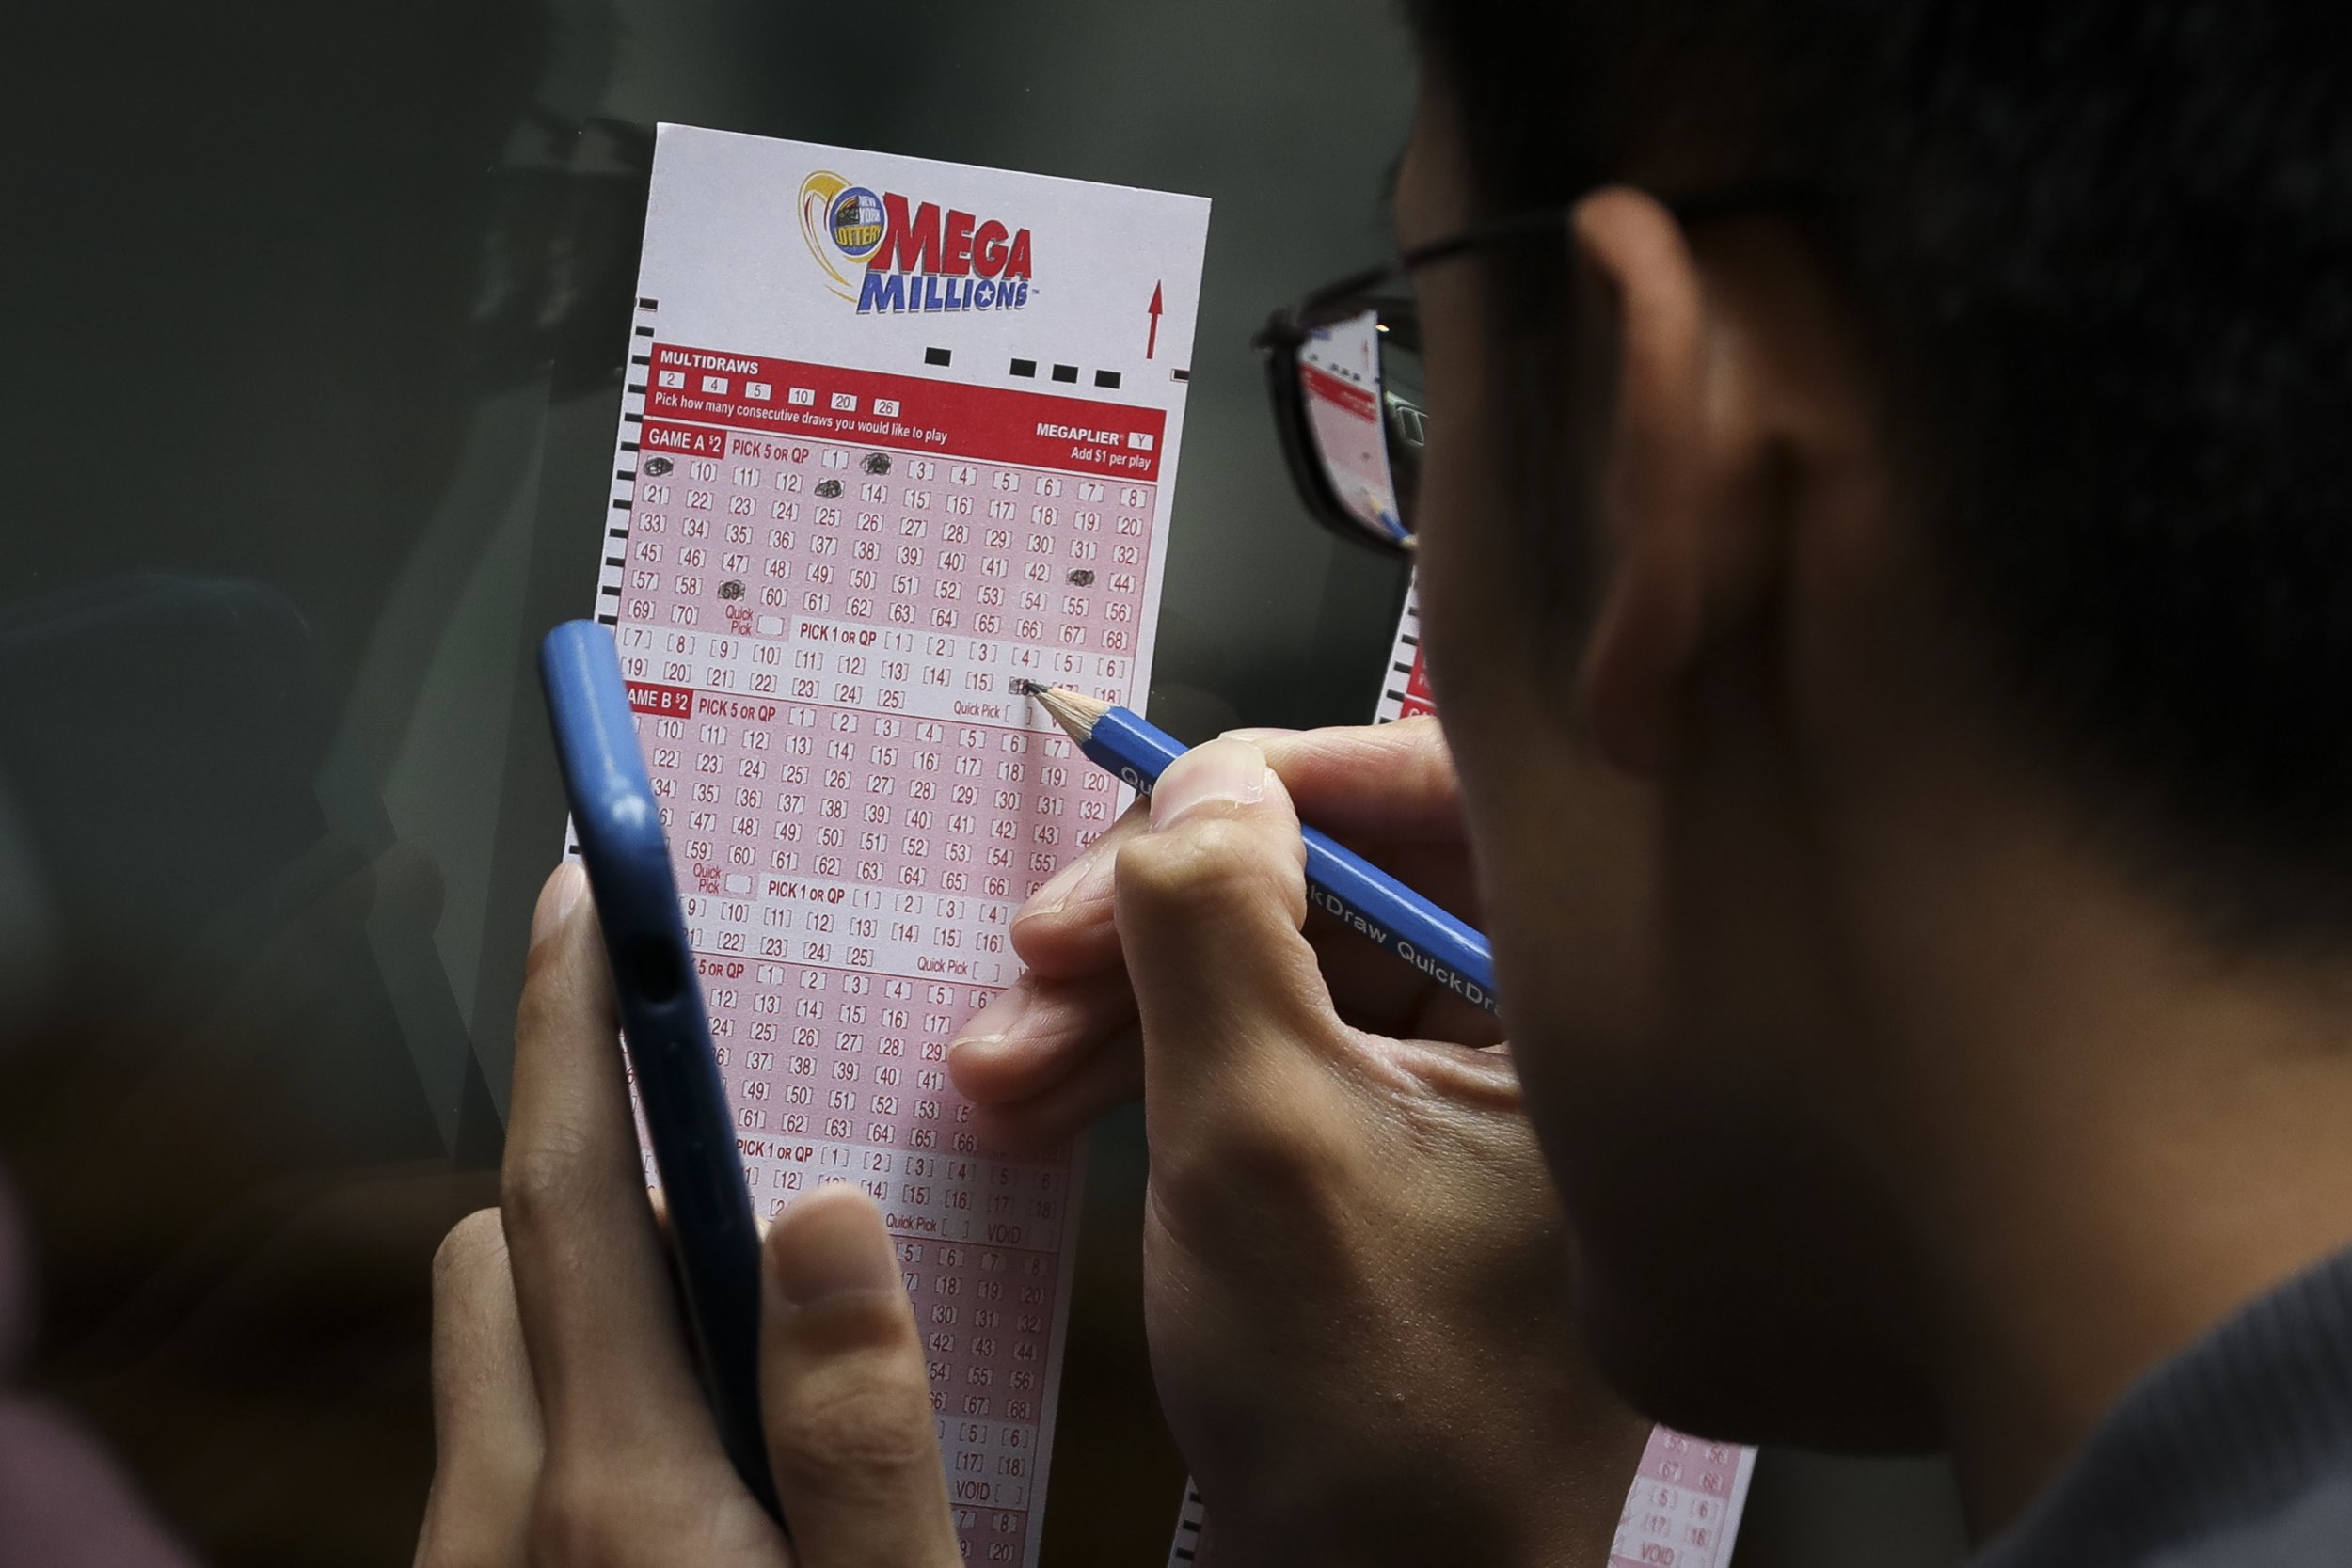 mega-millions-drawing-what-numbers-get-picked-the-most